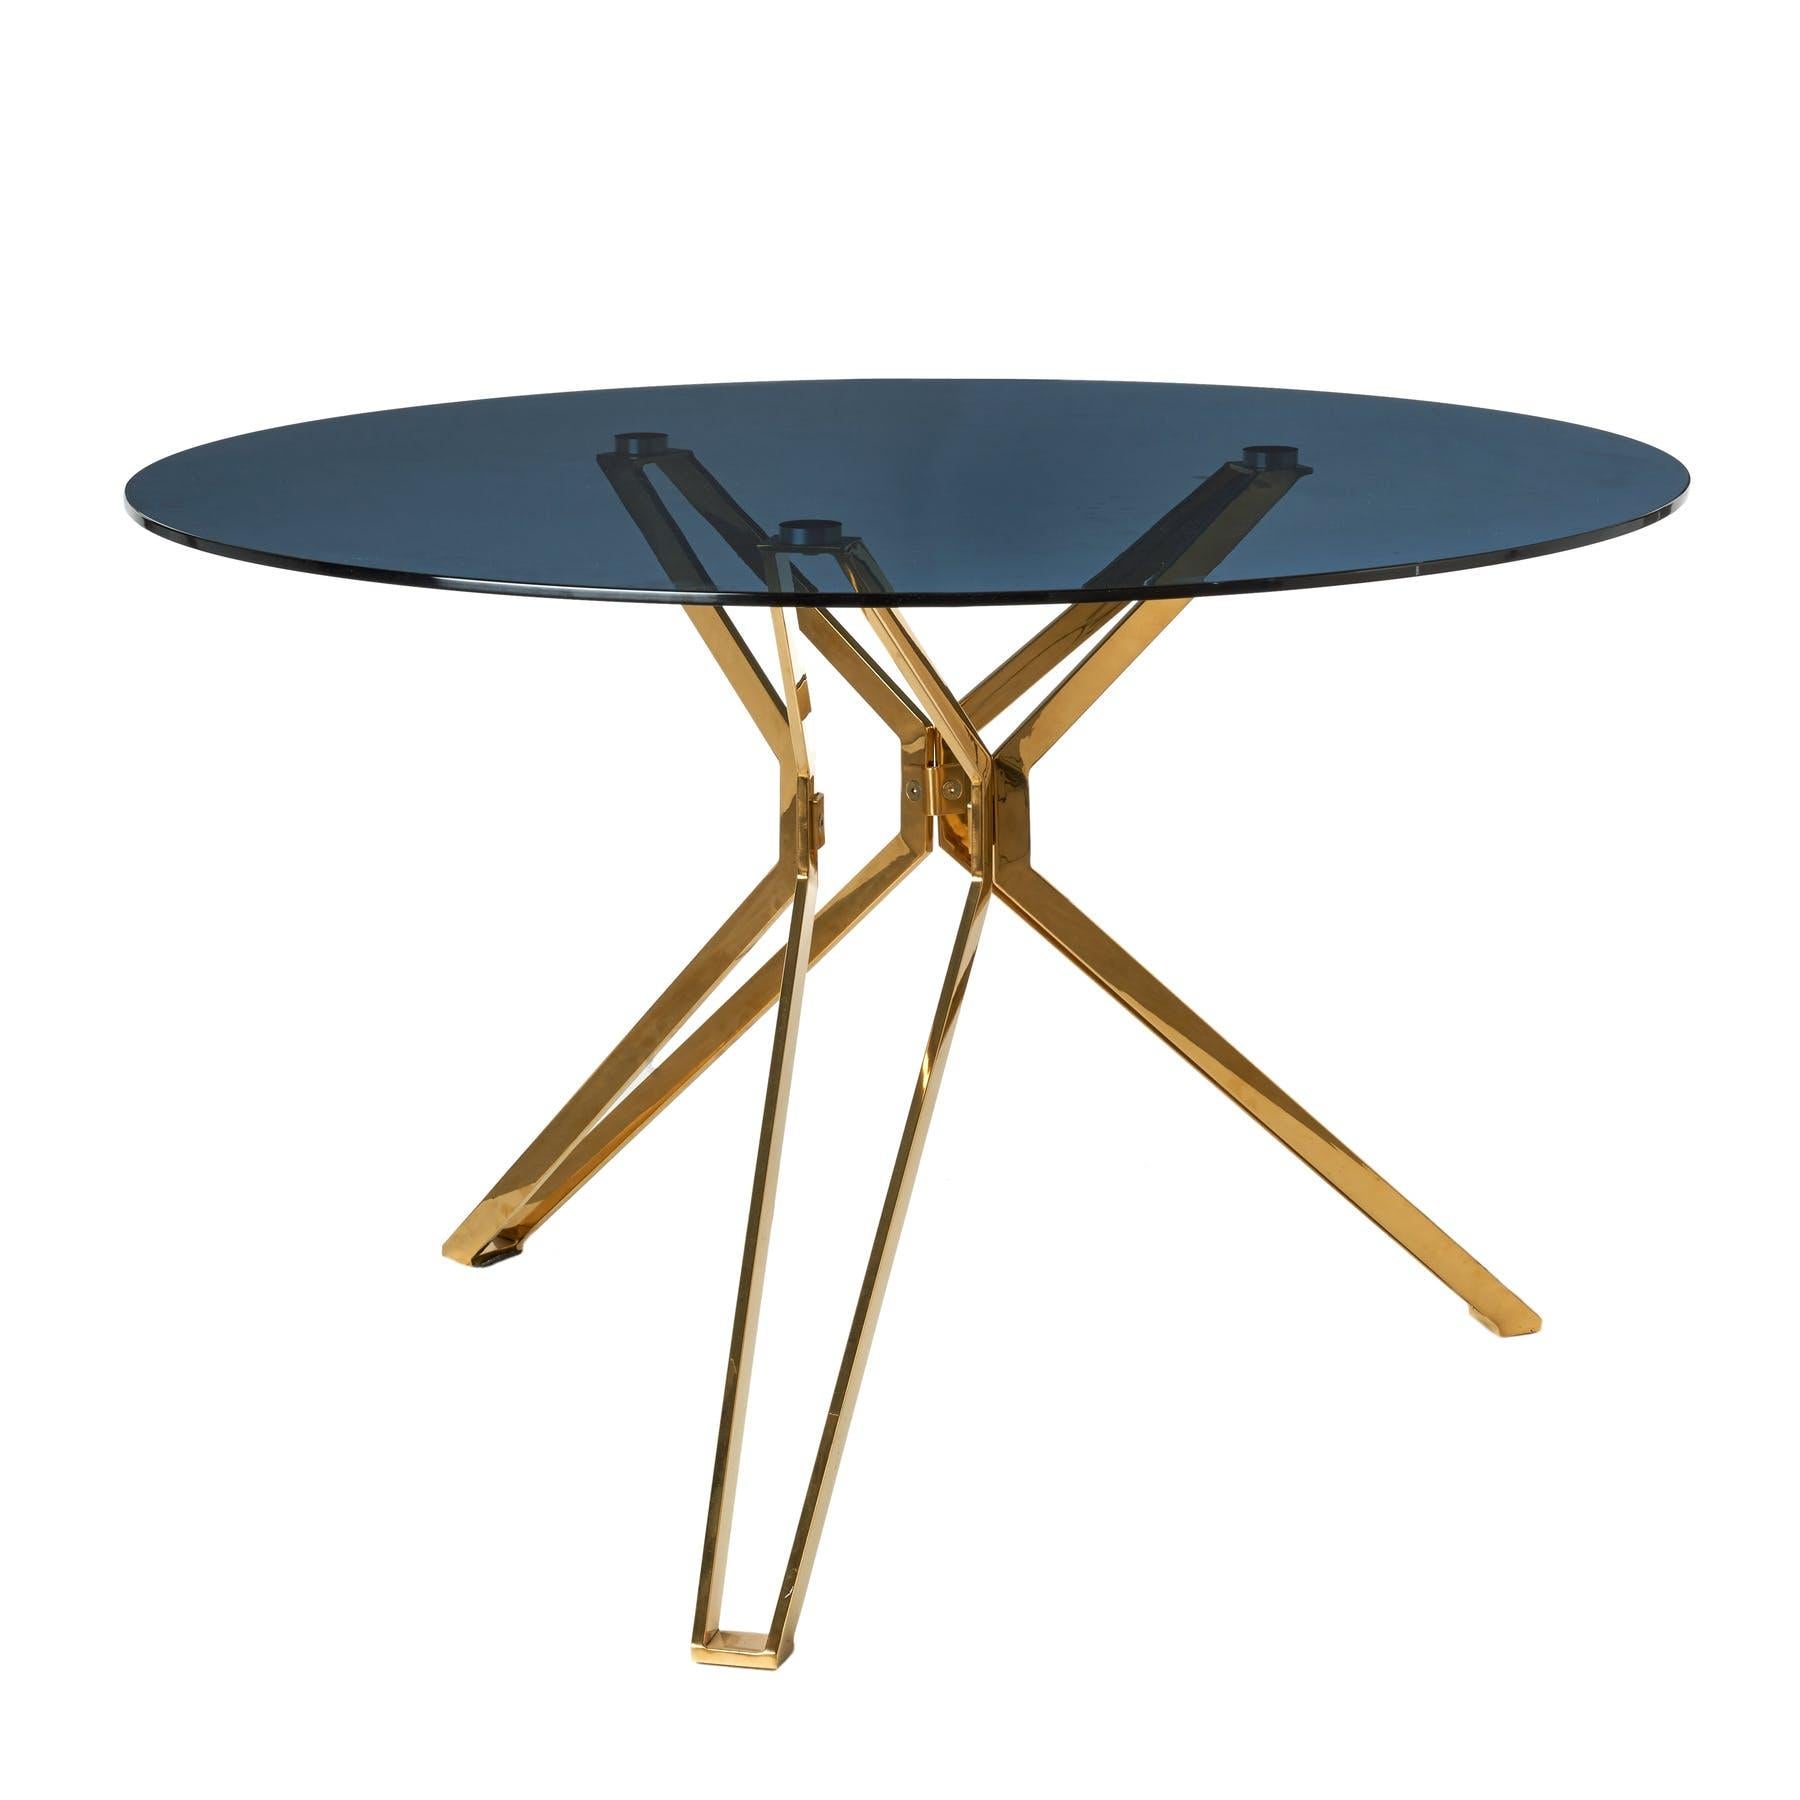 Modern glass round table, Pols Potten Studio
Dimensions: 120 diameter x height 76 cm
Materials: Powder coated stainless steel frame, tempered smoked glass


Pols Potten products are characterised by a modern twist on Traditional Design. Each of